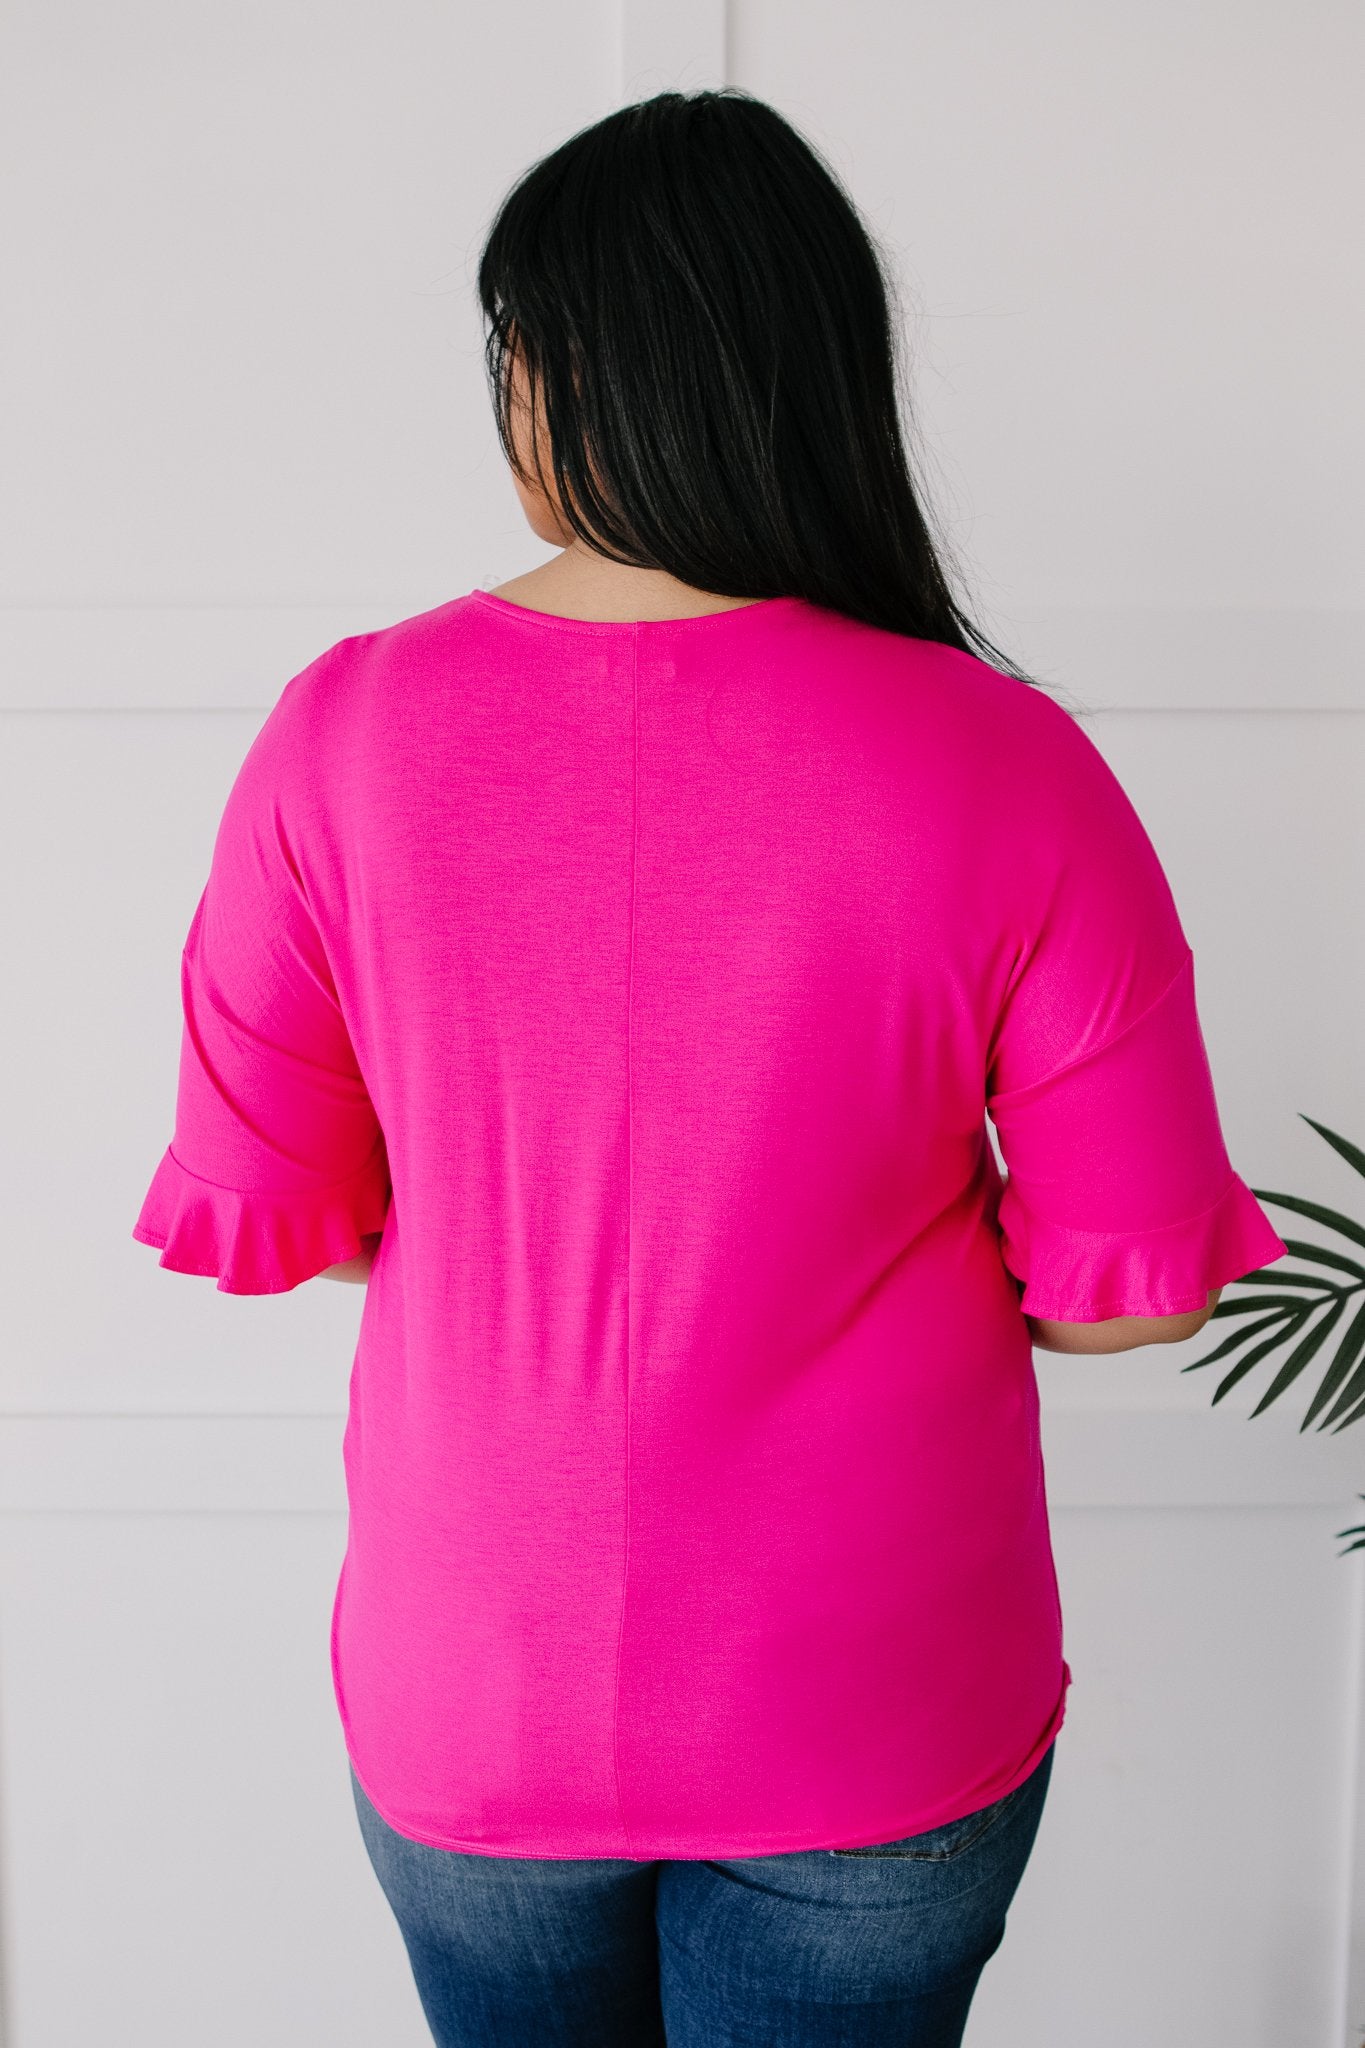 Crossing Wires Top in Fuchsia